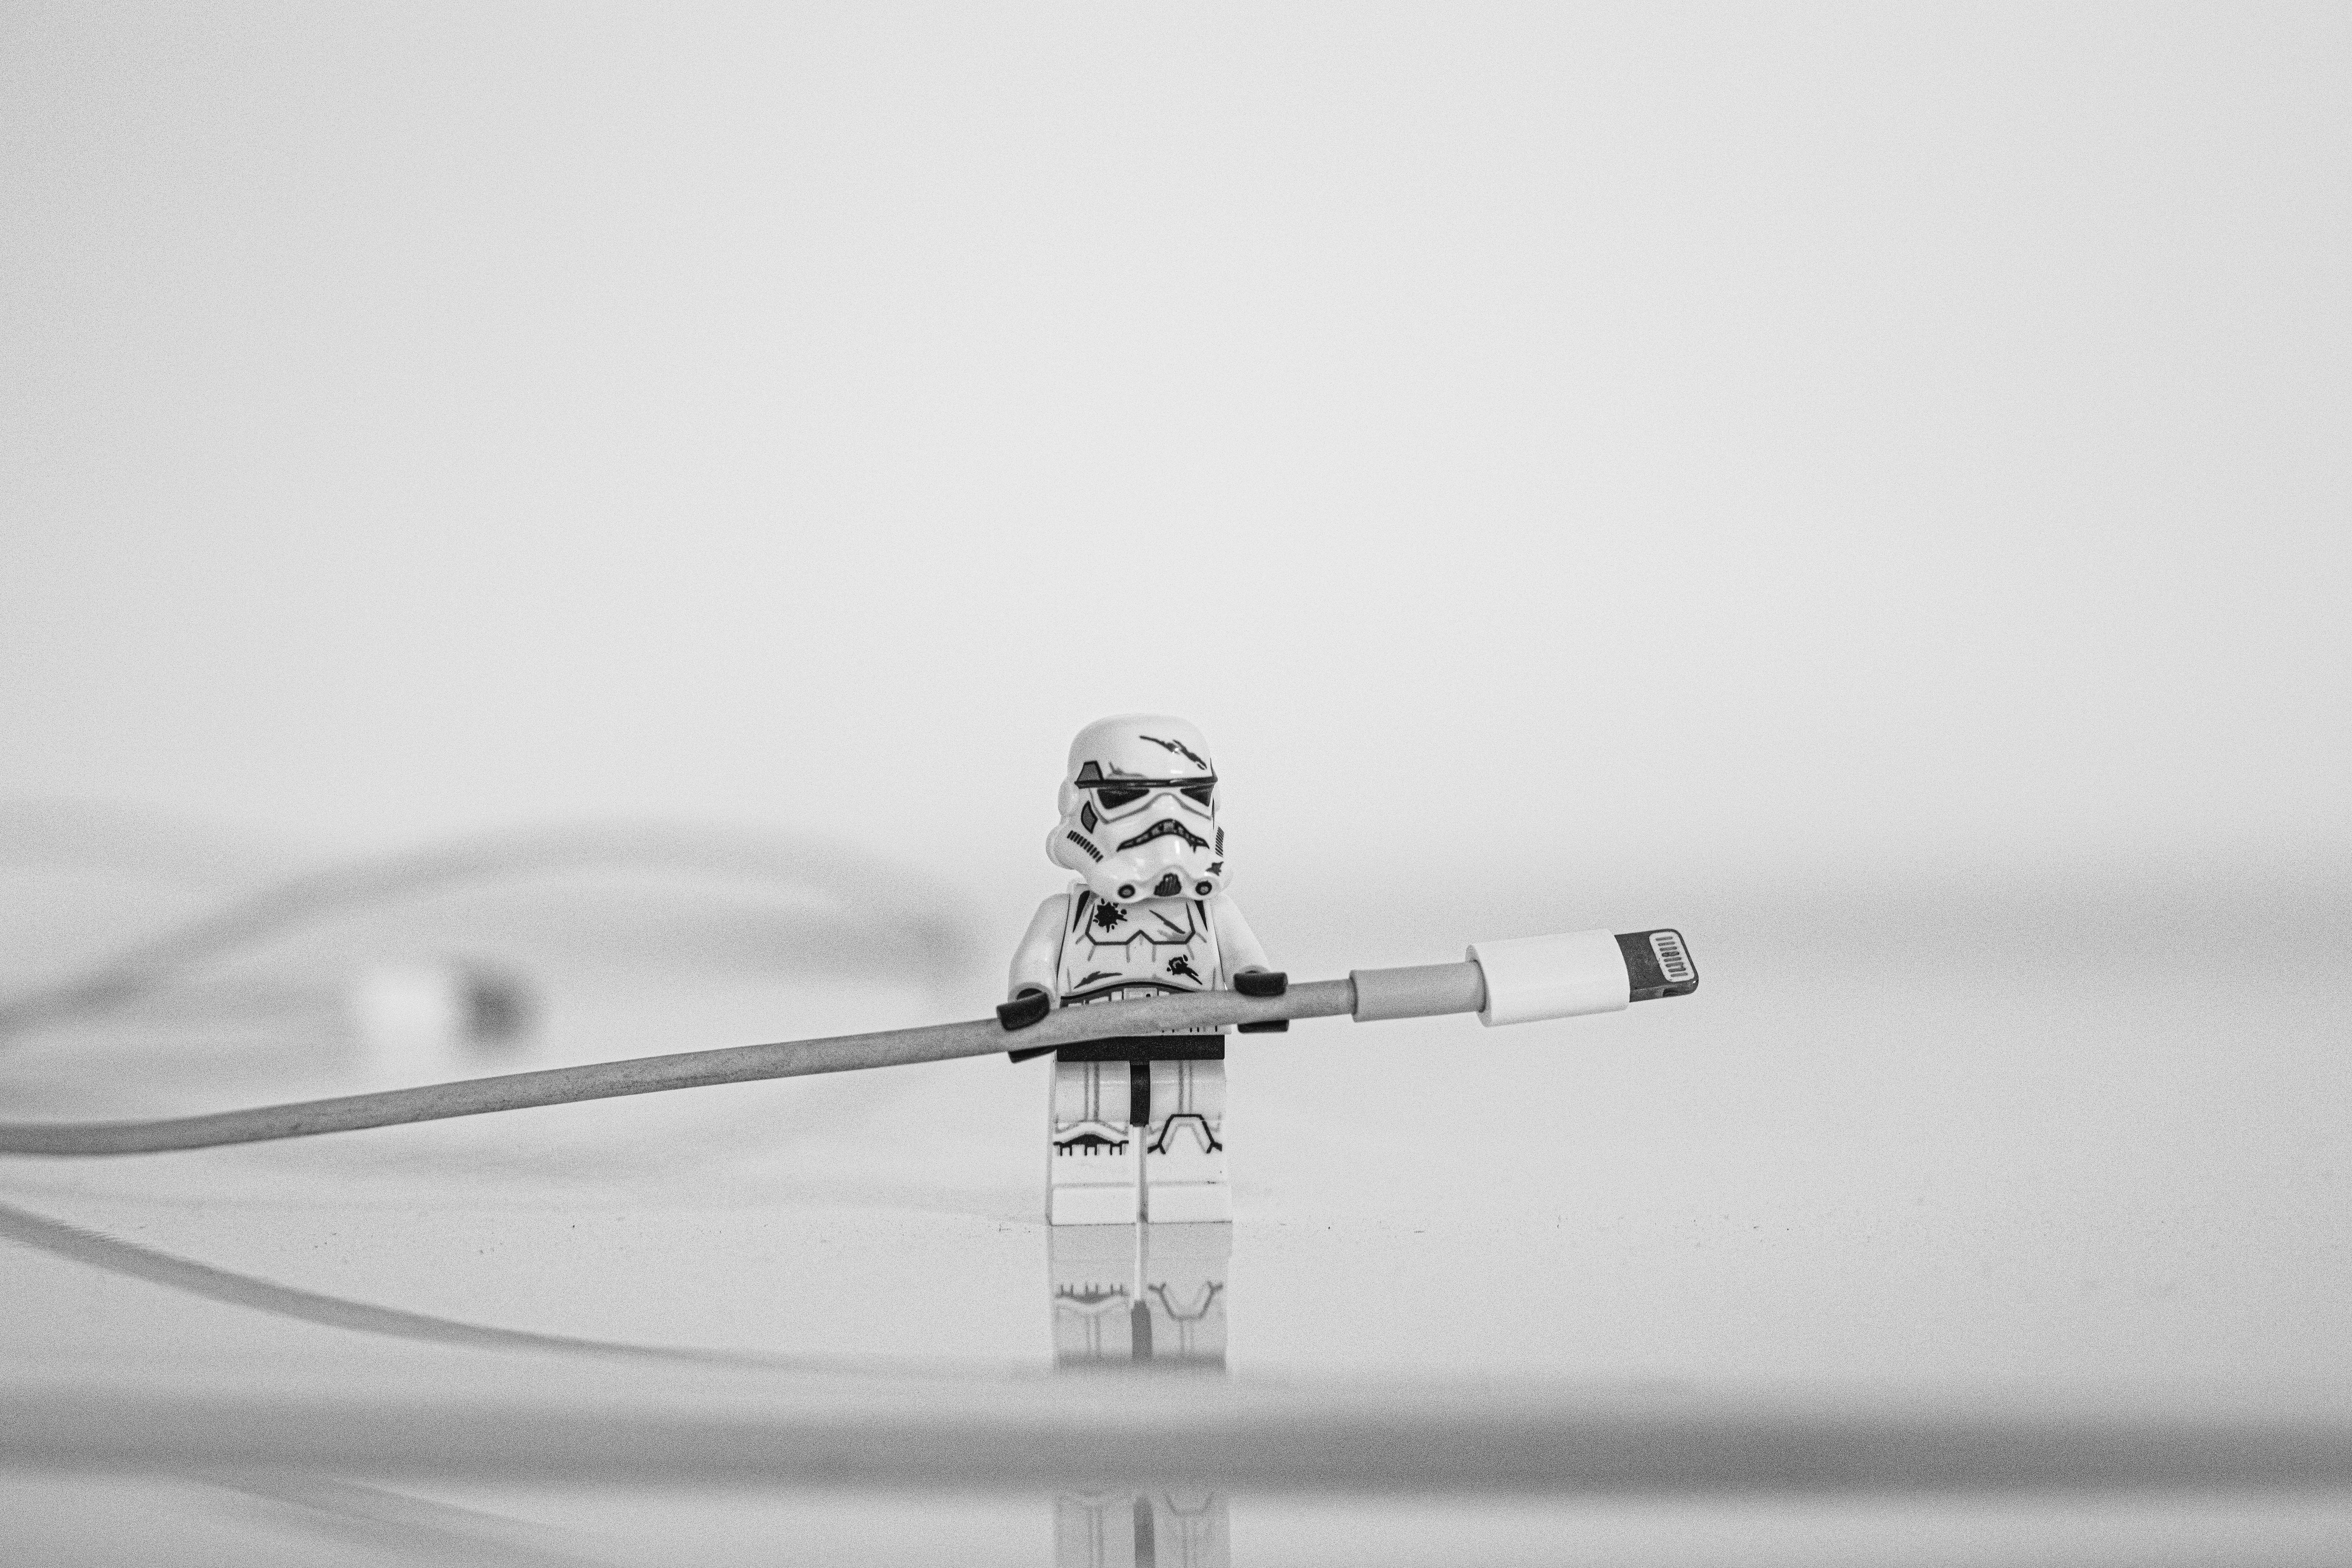 A lego storm trooper helpfully holds an iphone charger.